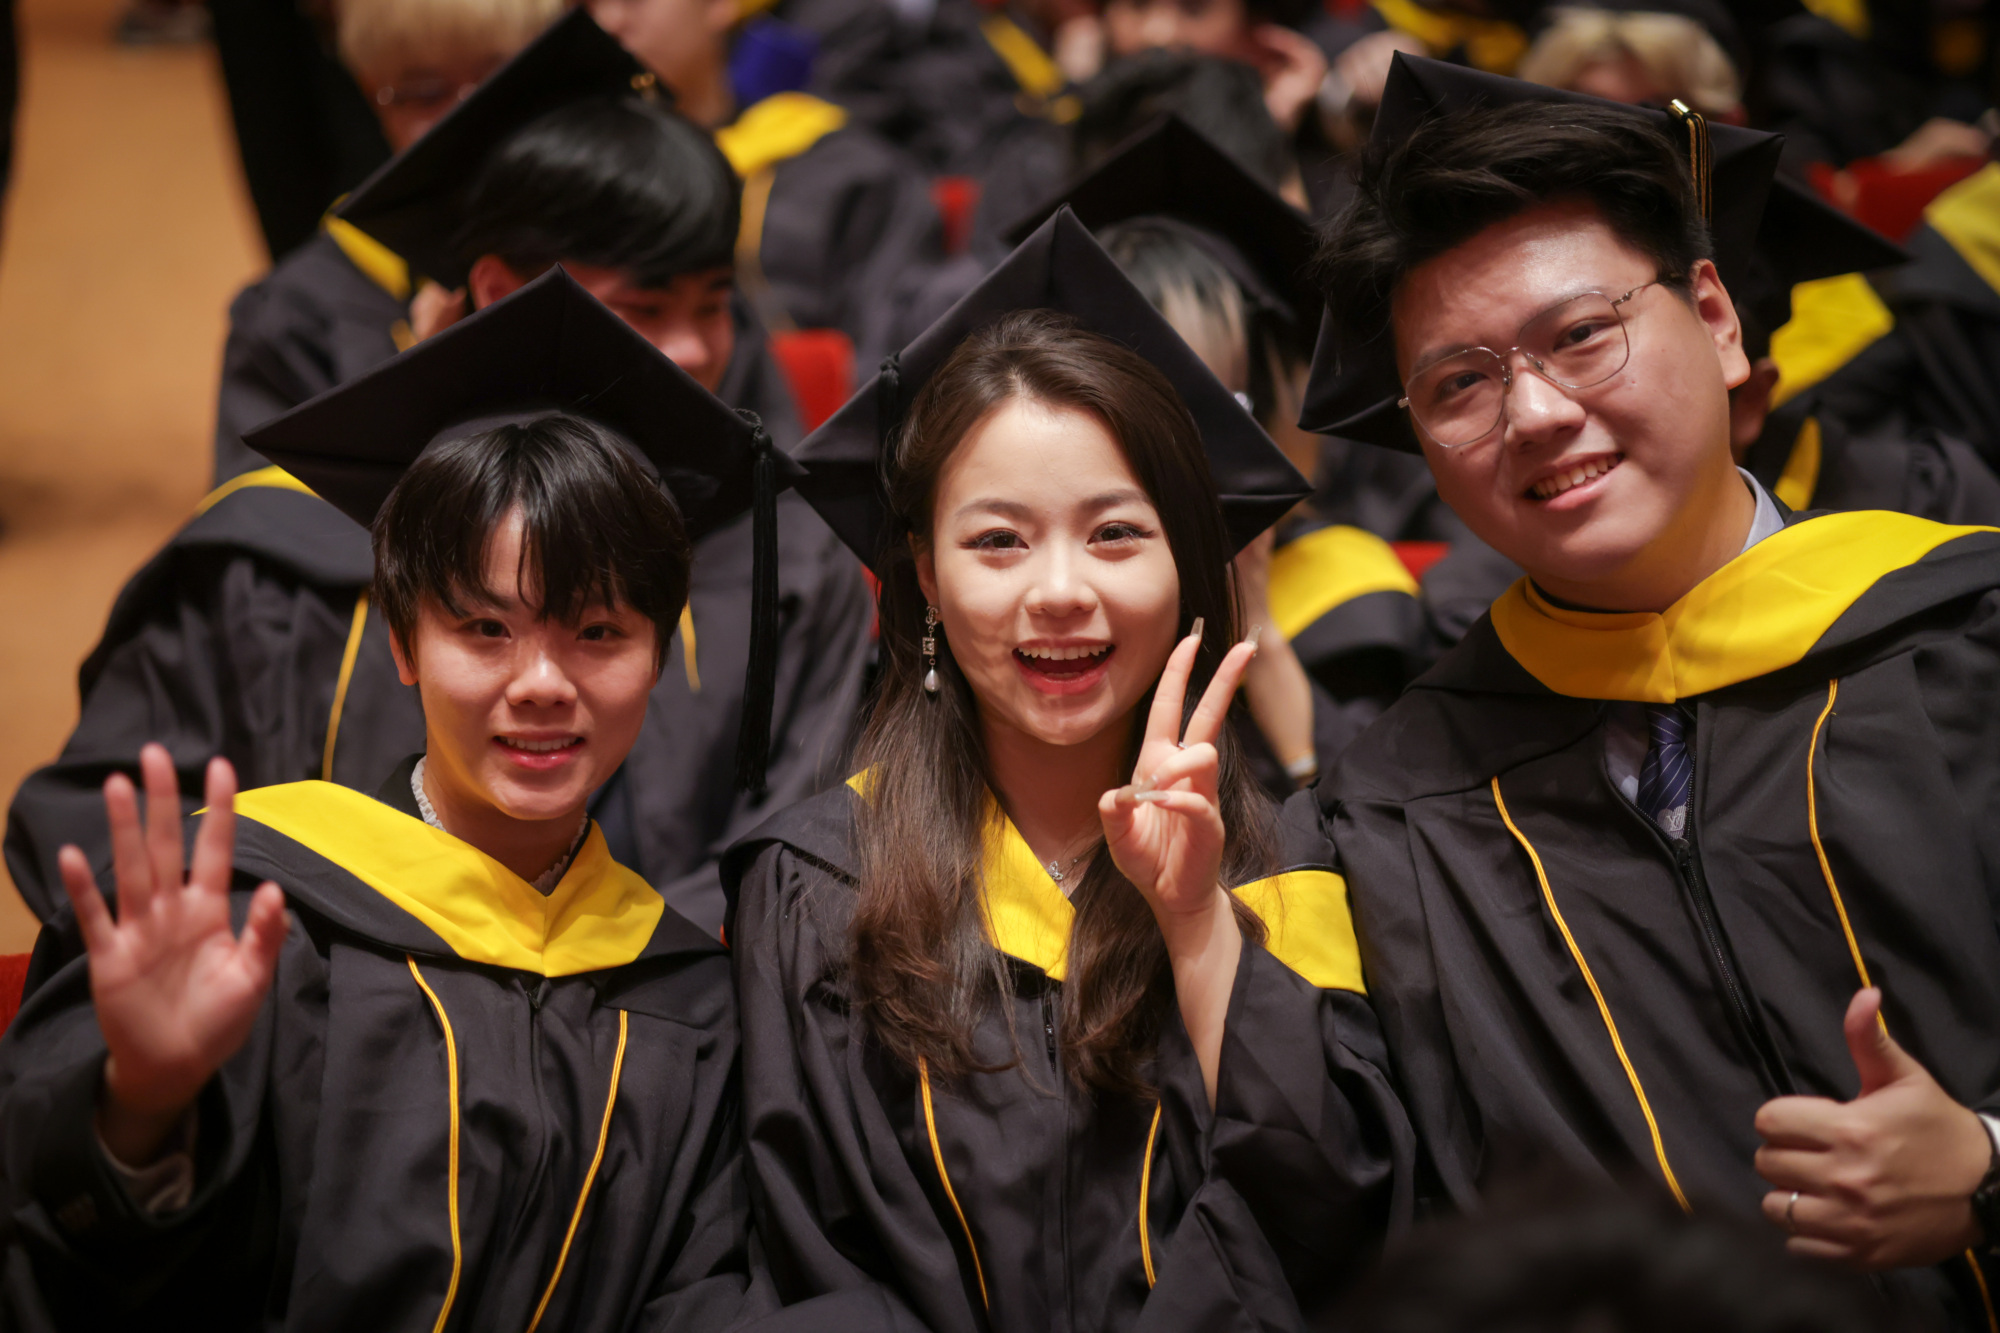 three people posing for photo holding up peace sign in graduation regalia